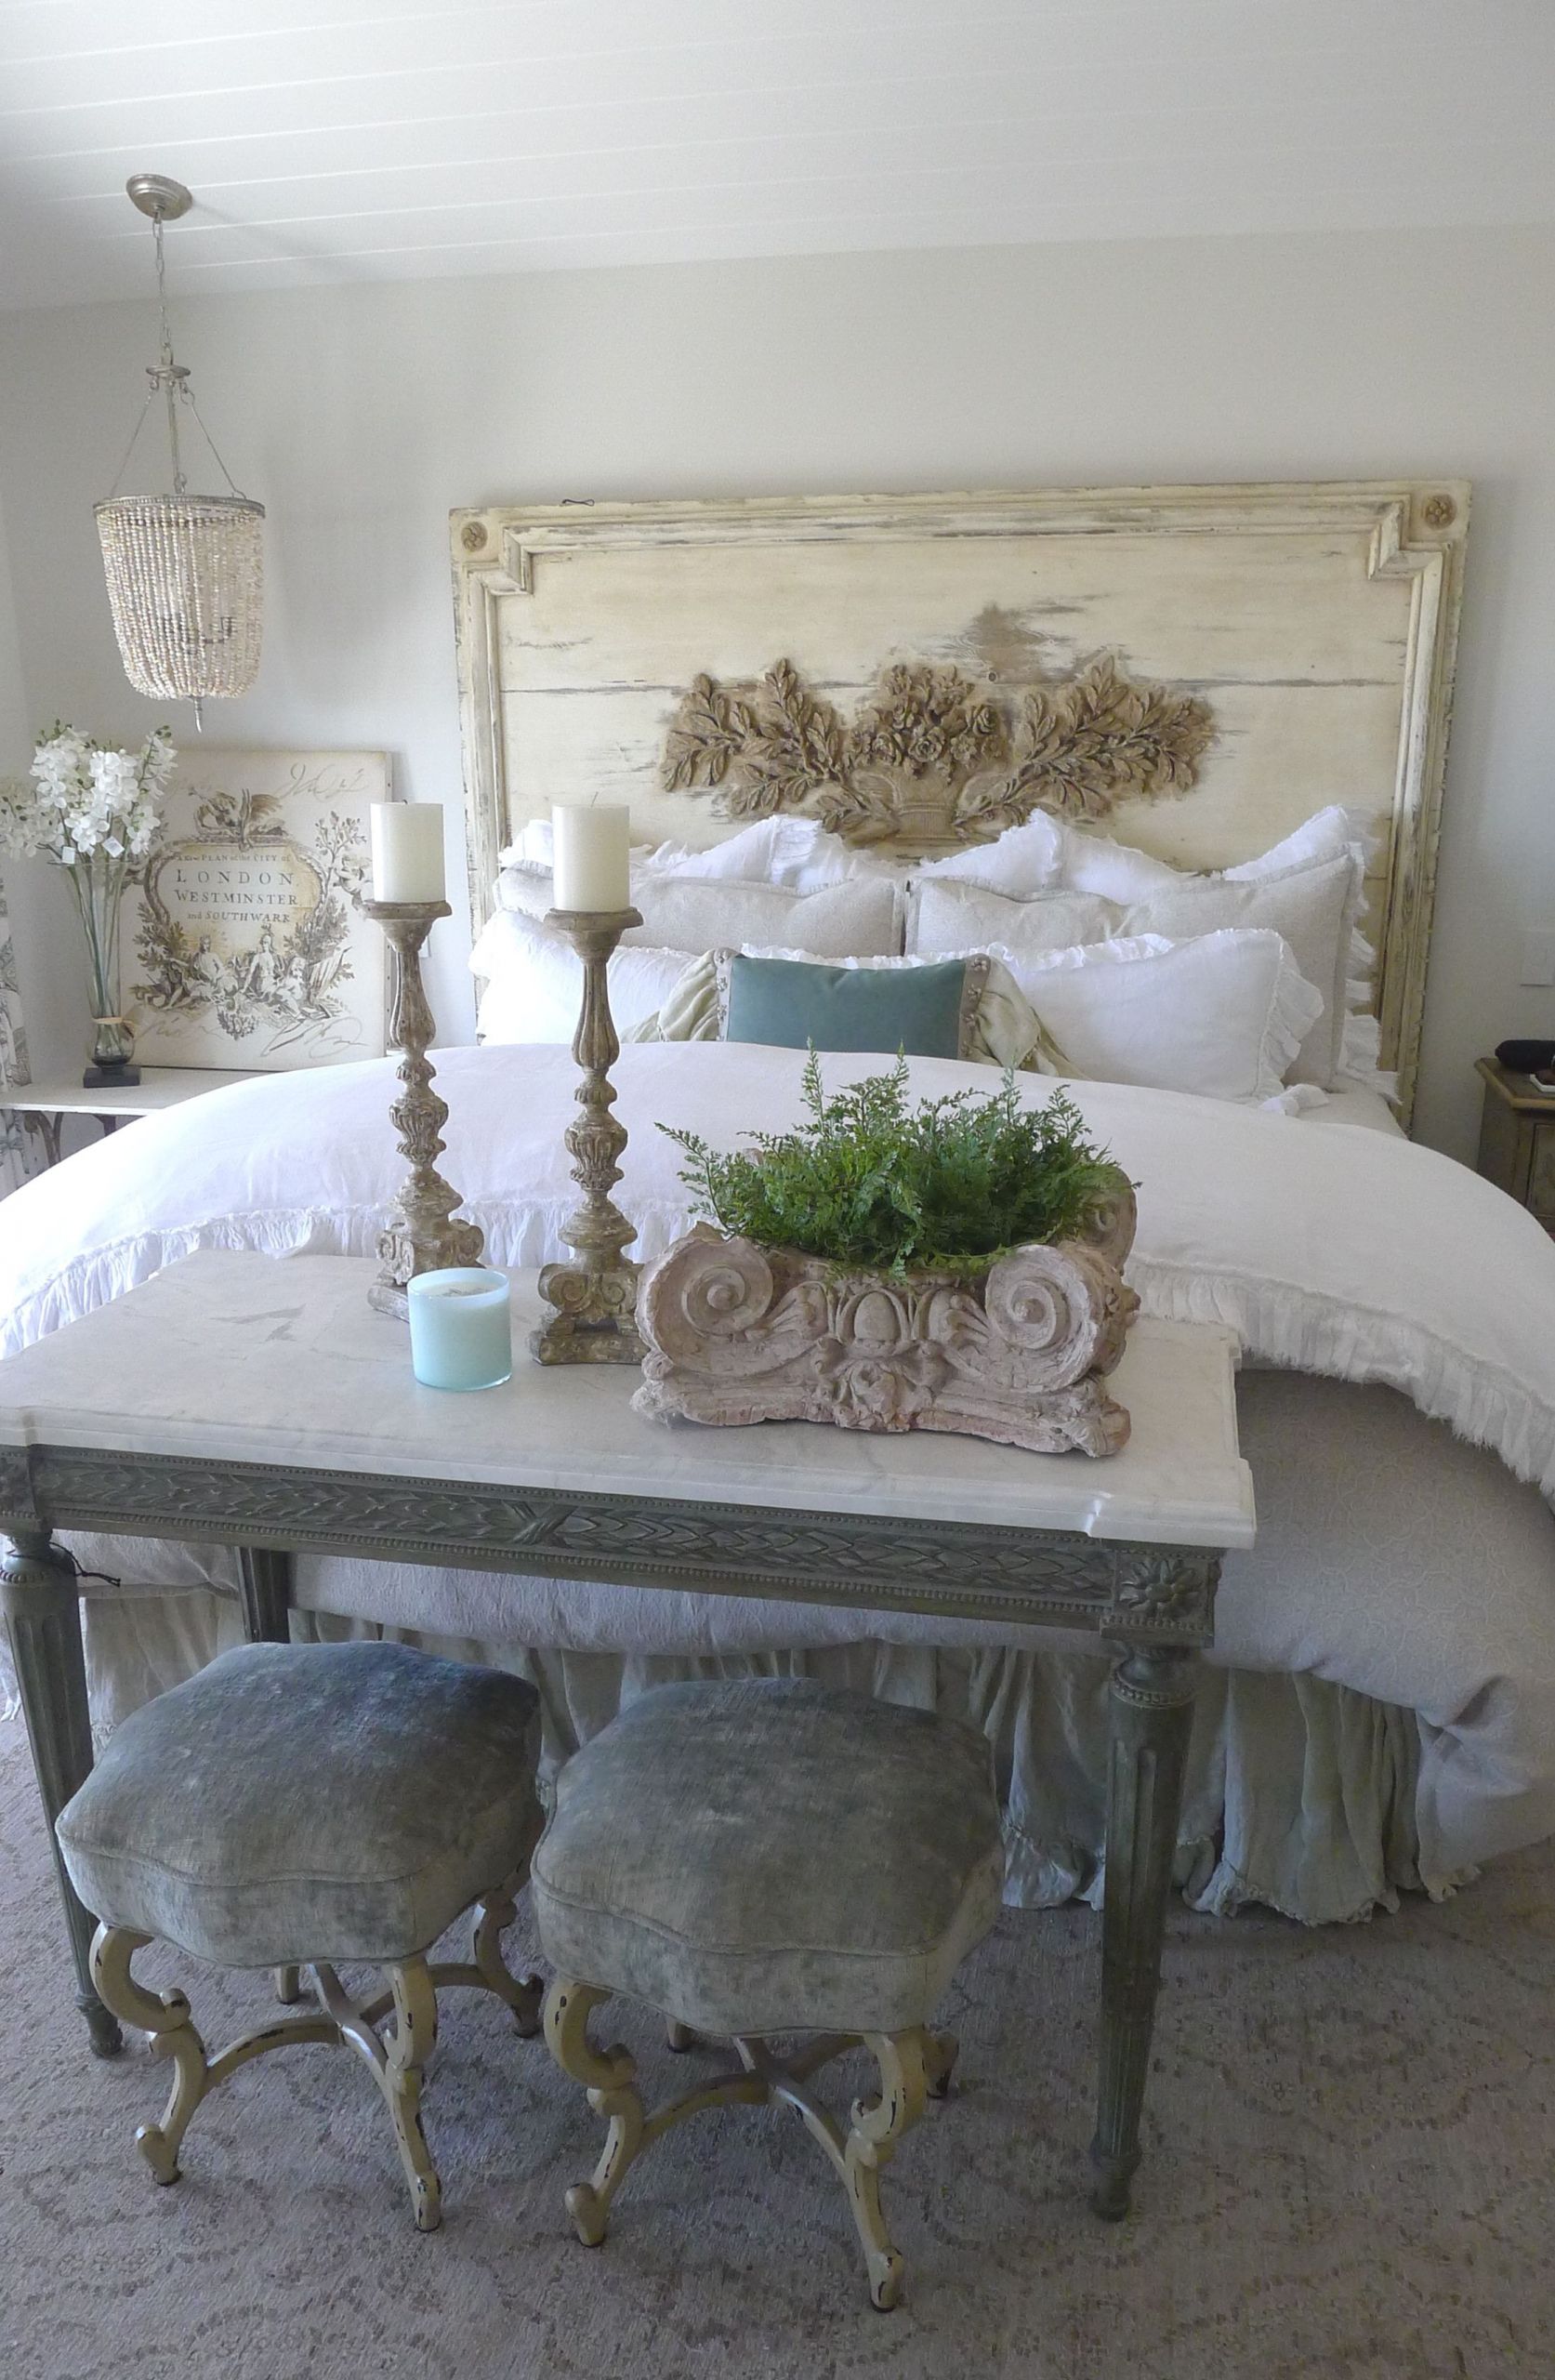 French Shabby Chic Bedroom Ideas
 French inspired California beach house